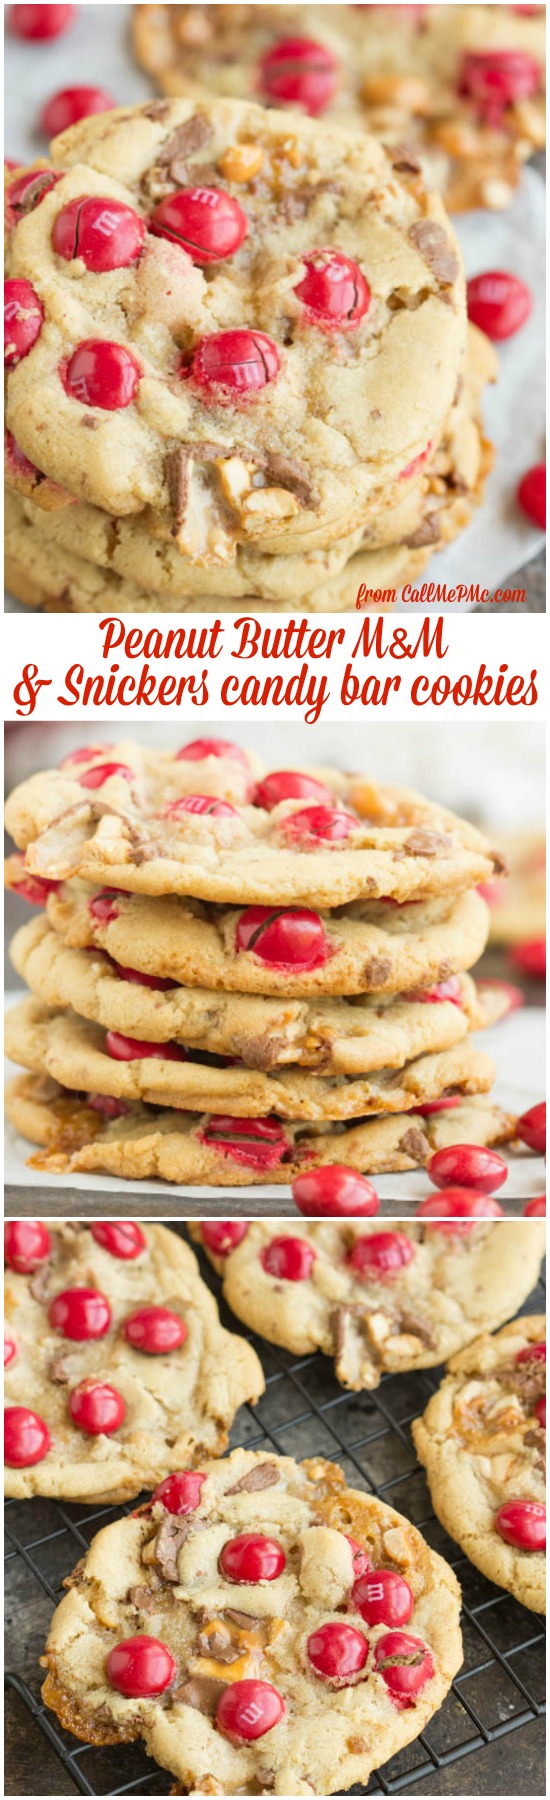 Peanut Butter M&M Snickers Cookies are soft and chewy cookies I filled with peanut butter M&M candies and chopped Snickers candy bars. They are the ultimate sugar rush! 